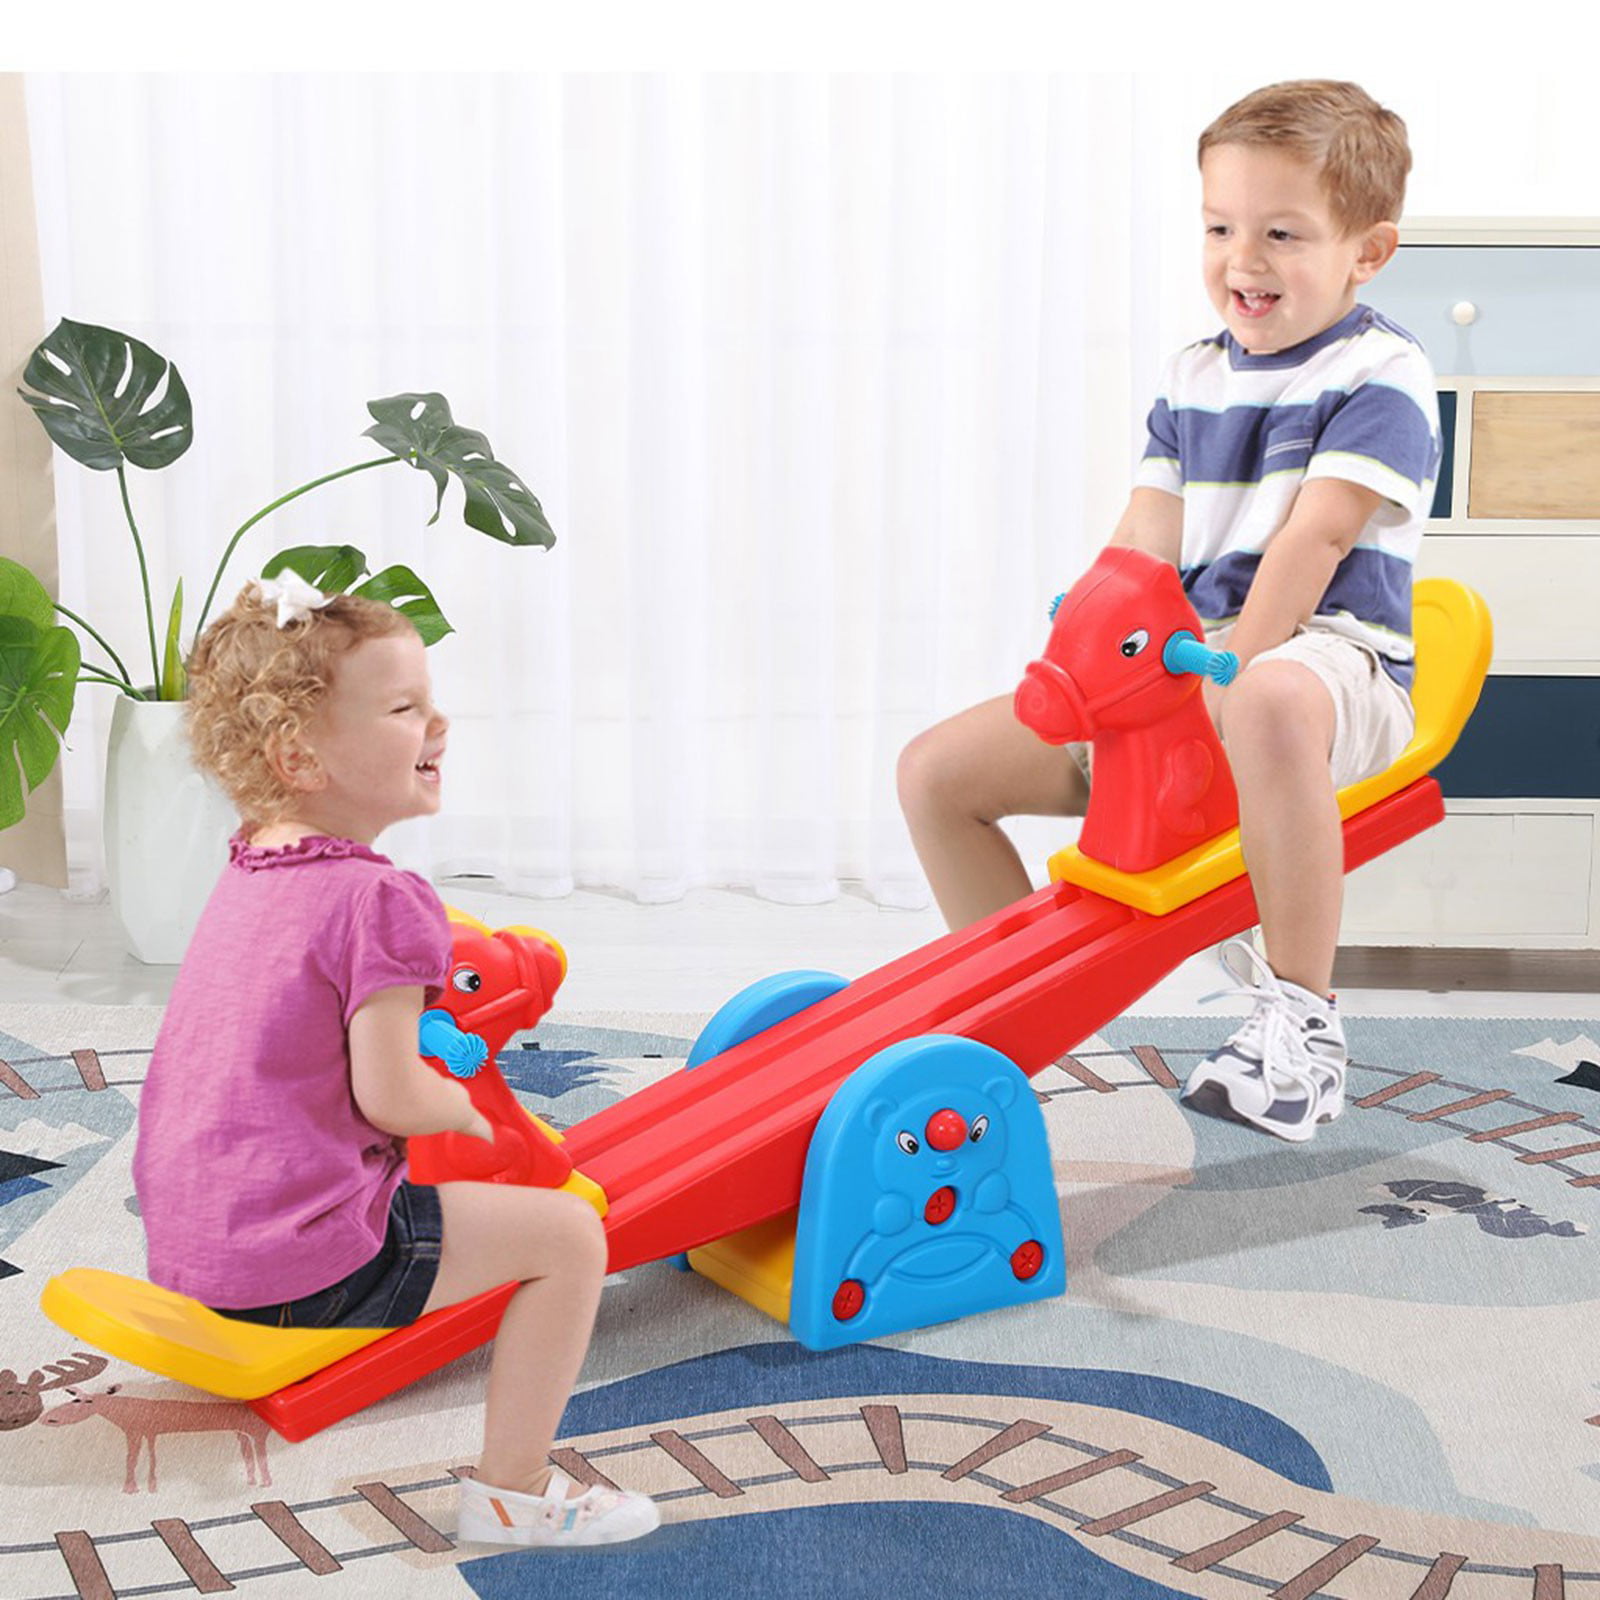 Kids Gift Teeter Totter Backyard or Playroom Equipment with Easy-Grip Handles Durable Indoor or Outdoor Play Develop Children Sense of Balance and Coordination Seesaw for Kids